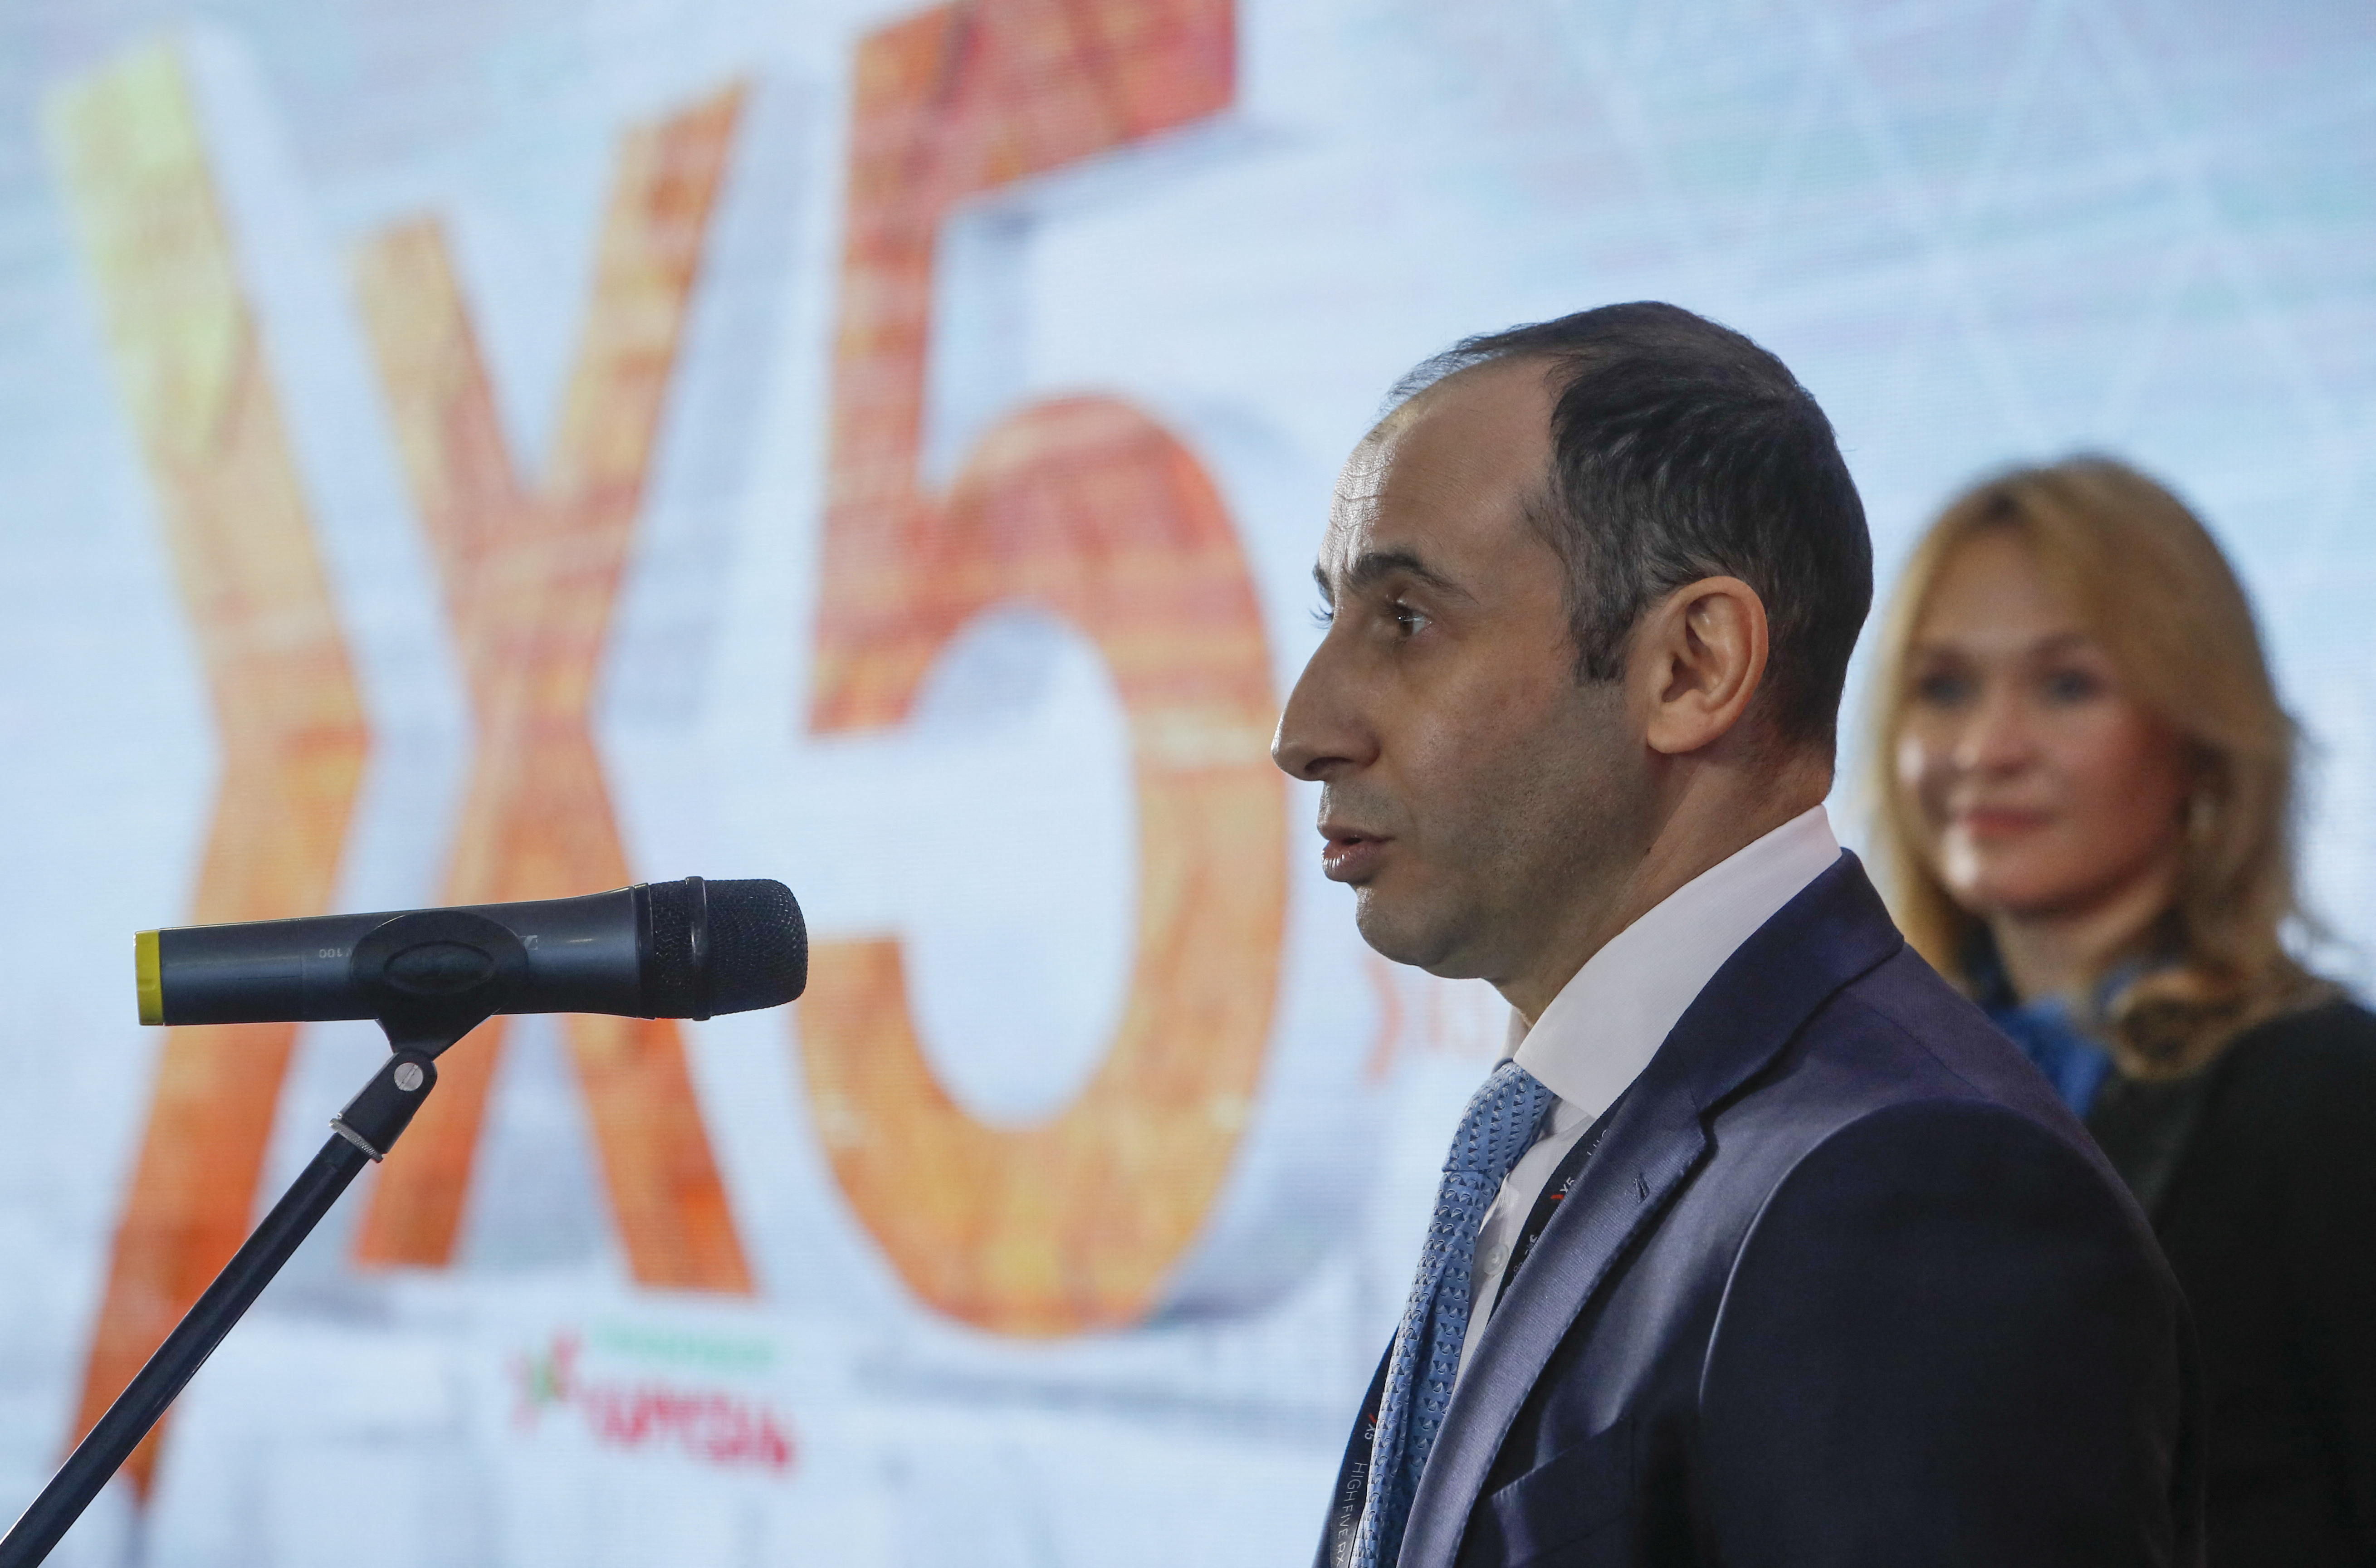 Chief Executive Officer of Х5 Retail Group Shekhterman speaks during a ceremony as Х5 Retail Group starts trading on Moscow Exchange